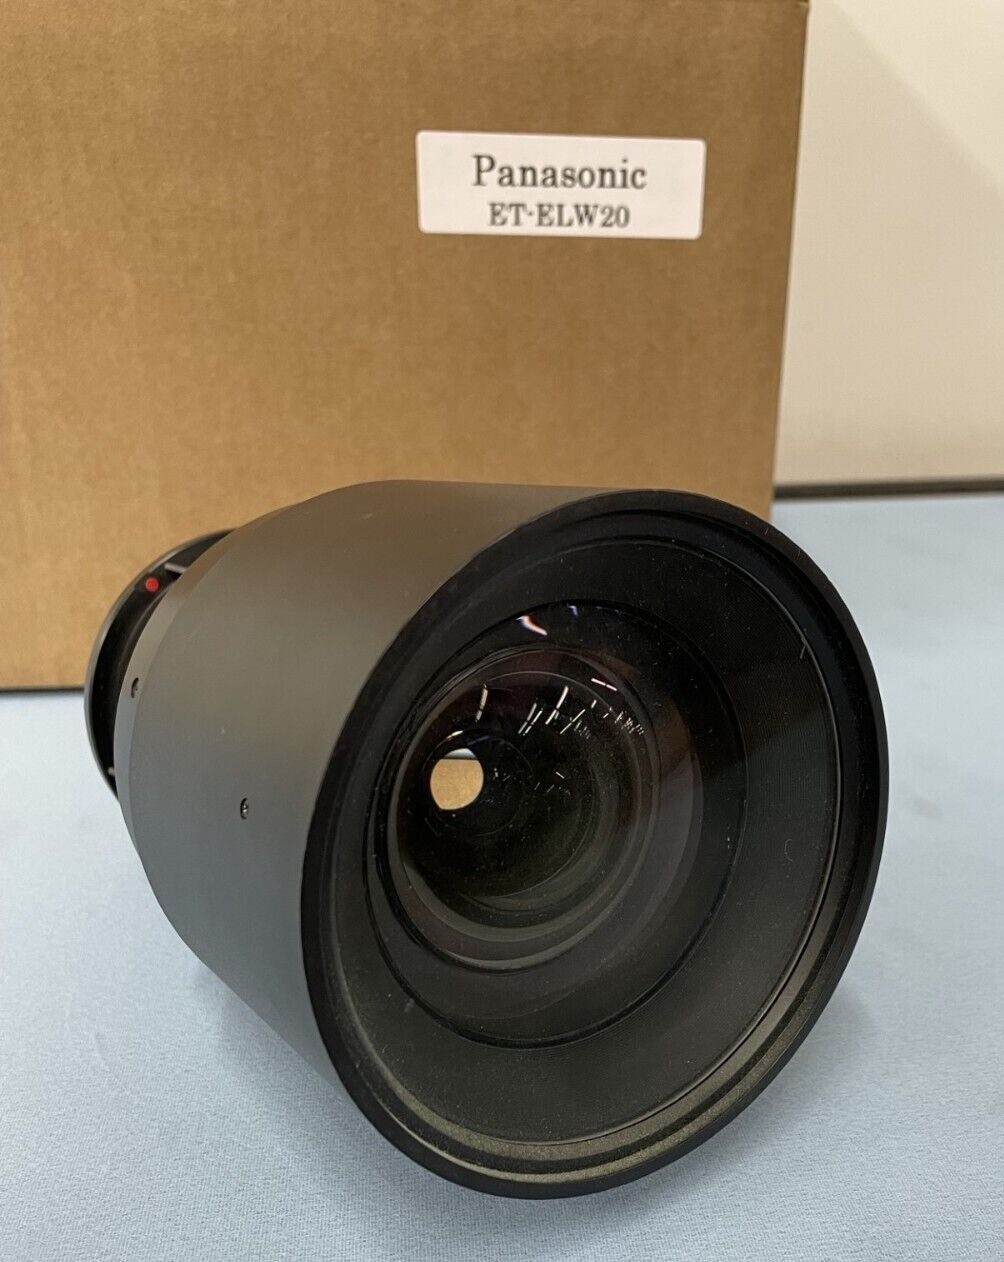 Panasonic ET-ELW20 Short-Throw / Wide Angle 3LCD Projector Zoom Lens